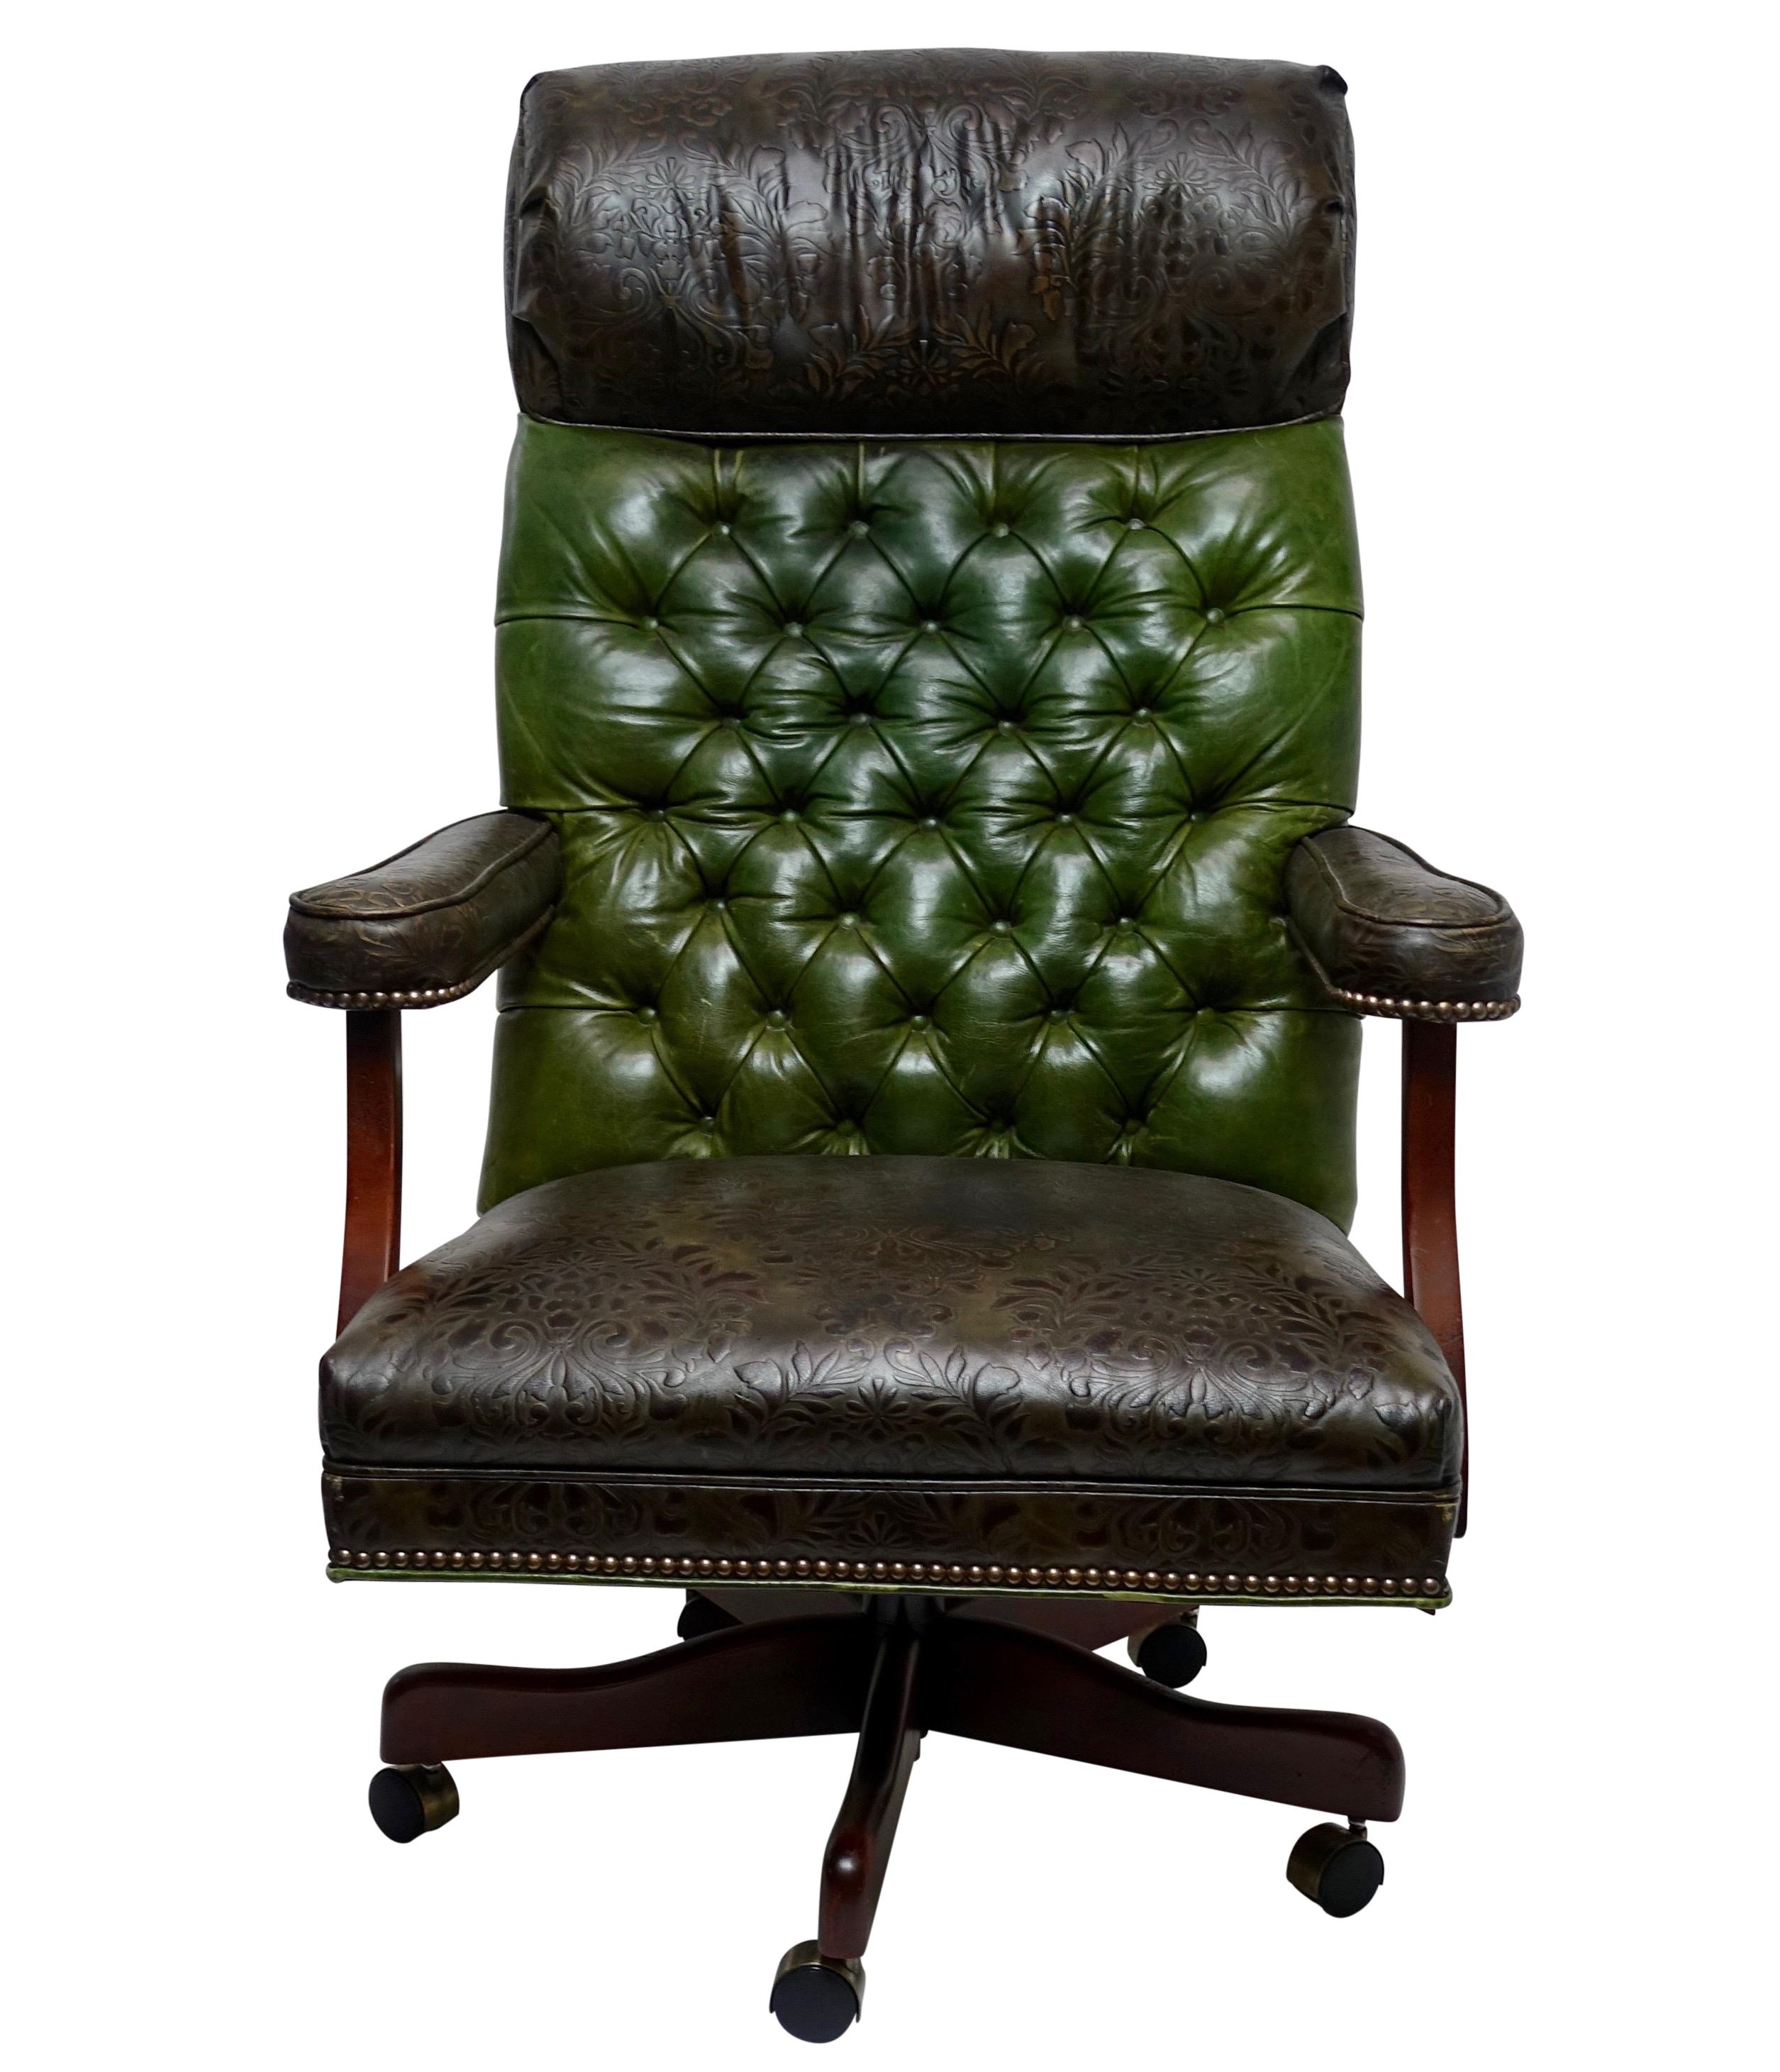 Custom mixed leather executive office chair with embossed brown leather headrest, seat, arms, with tufted green leather backrest. The chair is in remarkable condition the leather has been cleaned and conditioned. All the casters roll easily, the